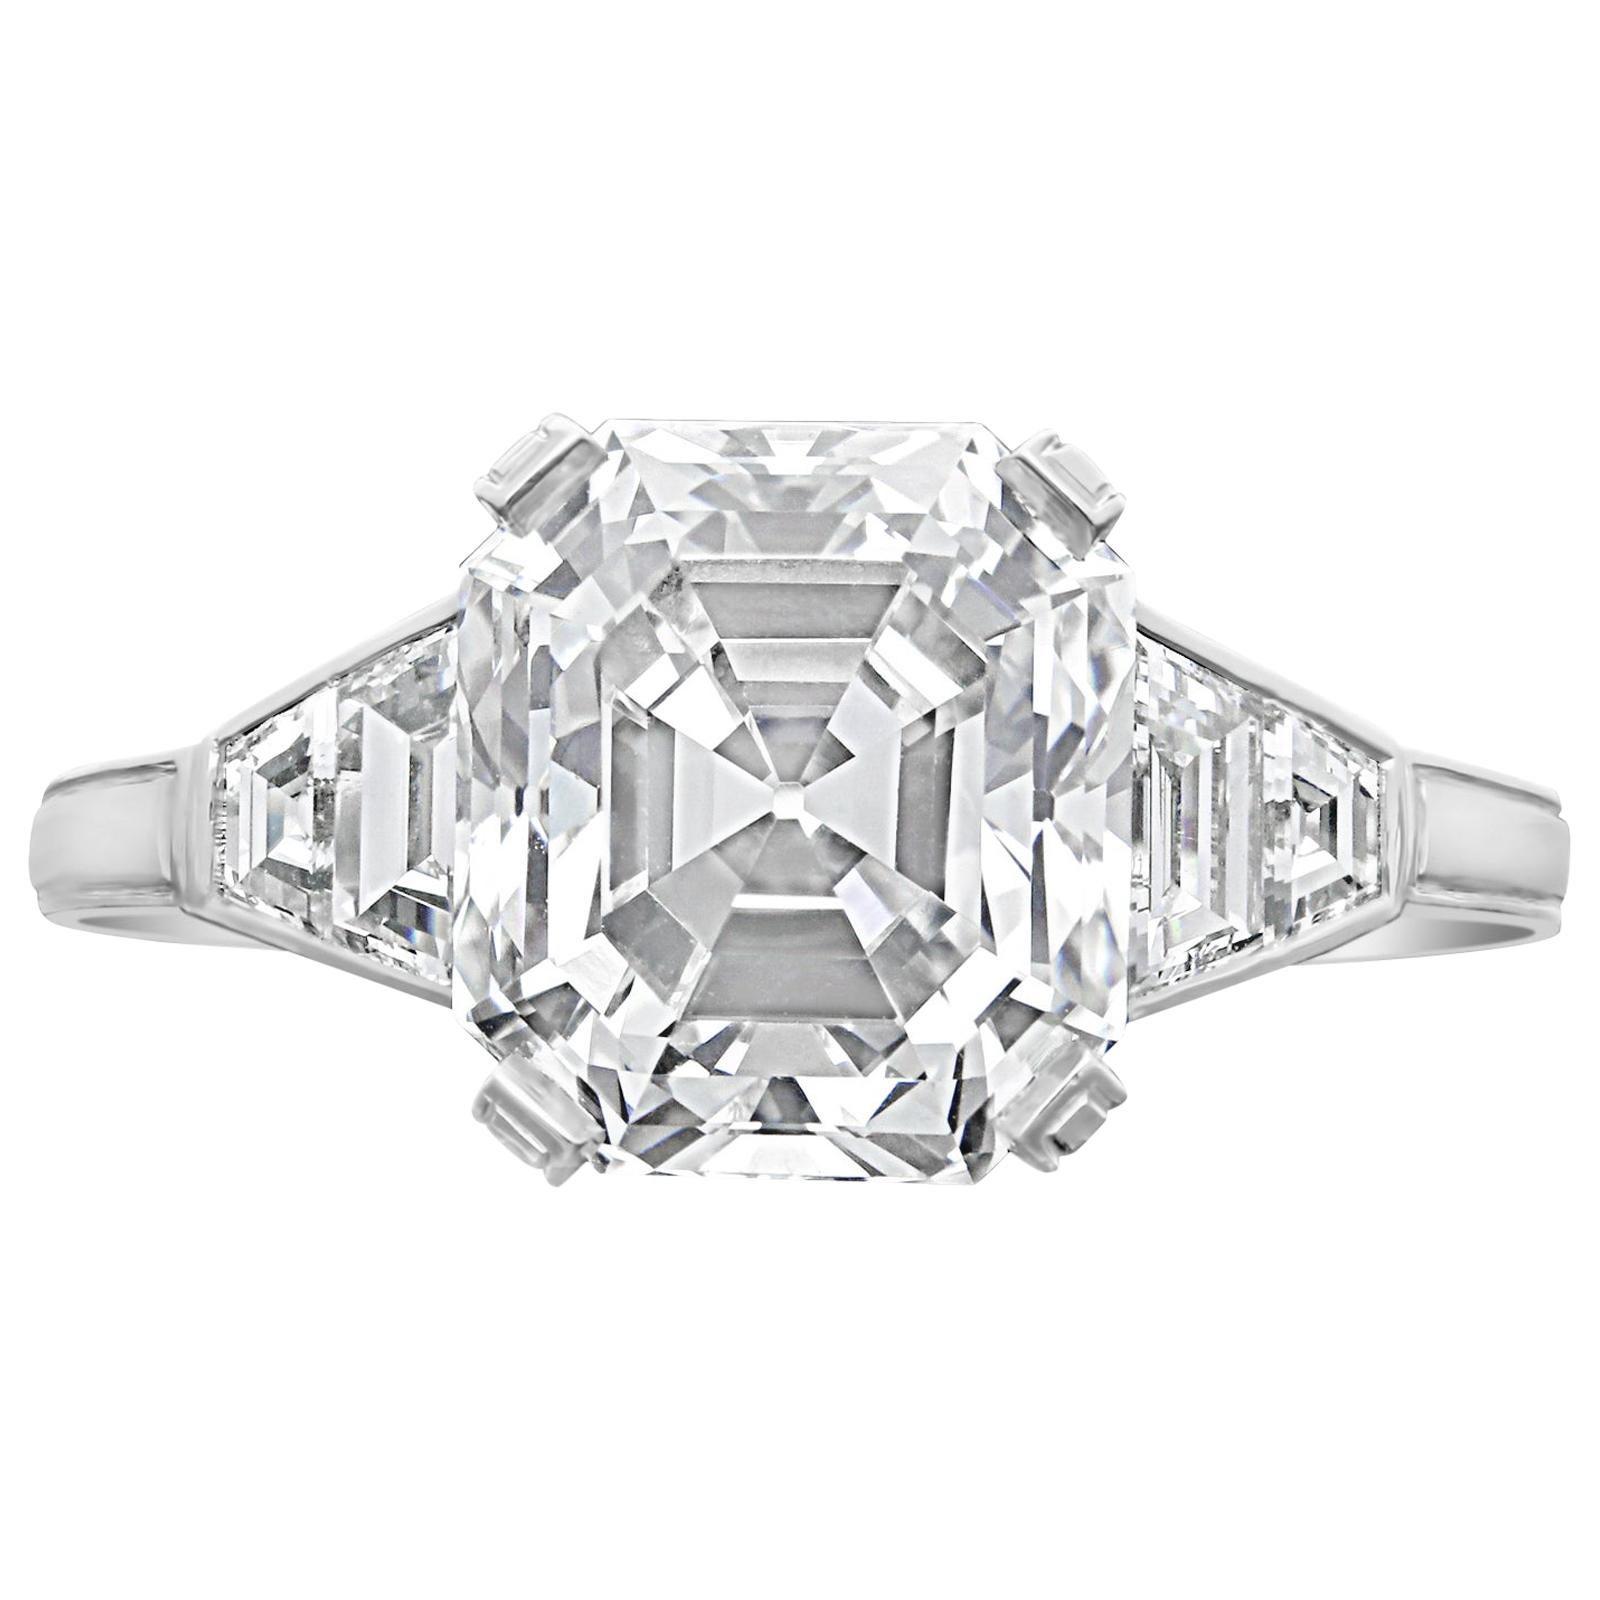 4.66ct H VS2 Old Asscher Cut Diamond Ring with Trapezoid Diamonds by Hancocks